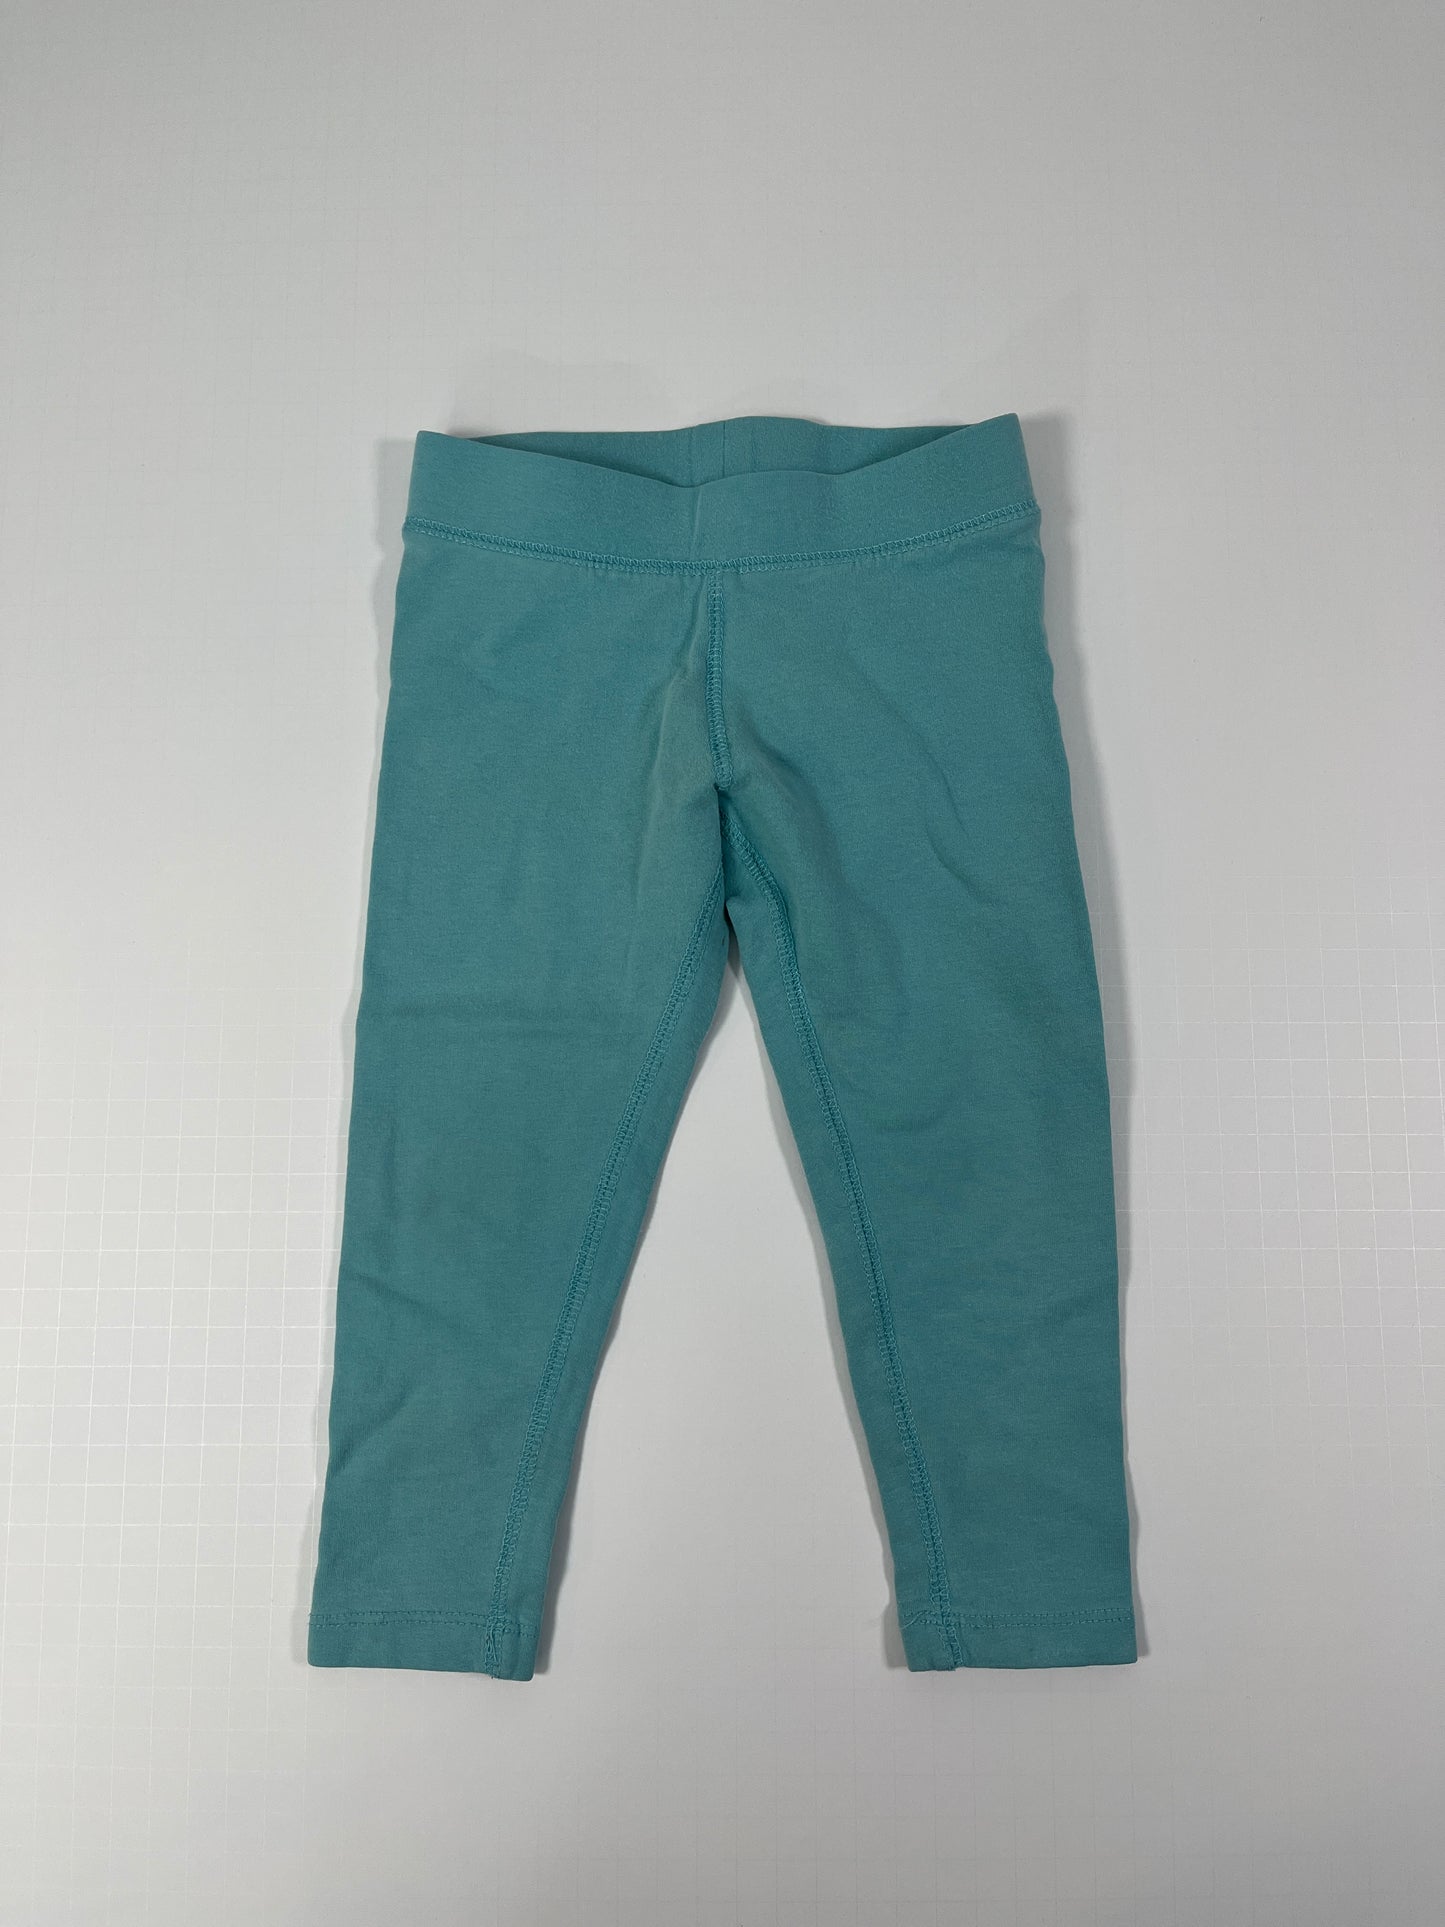 PPU 45242 2T girls primary brand teal classic leggings